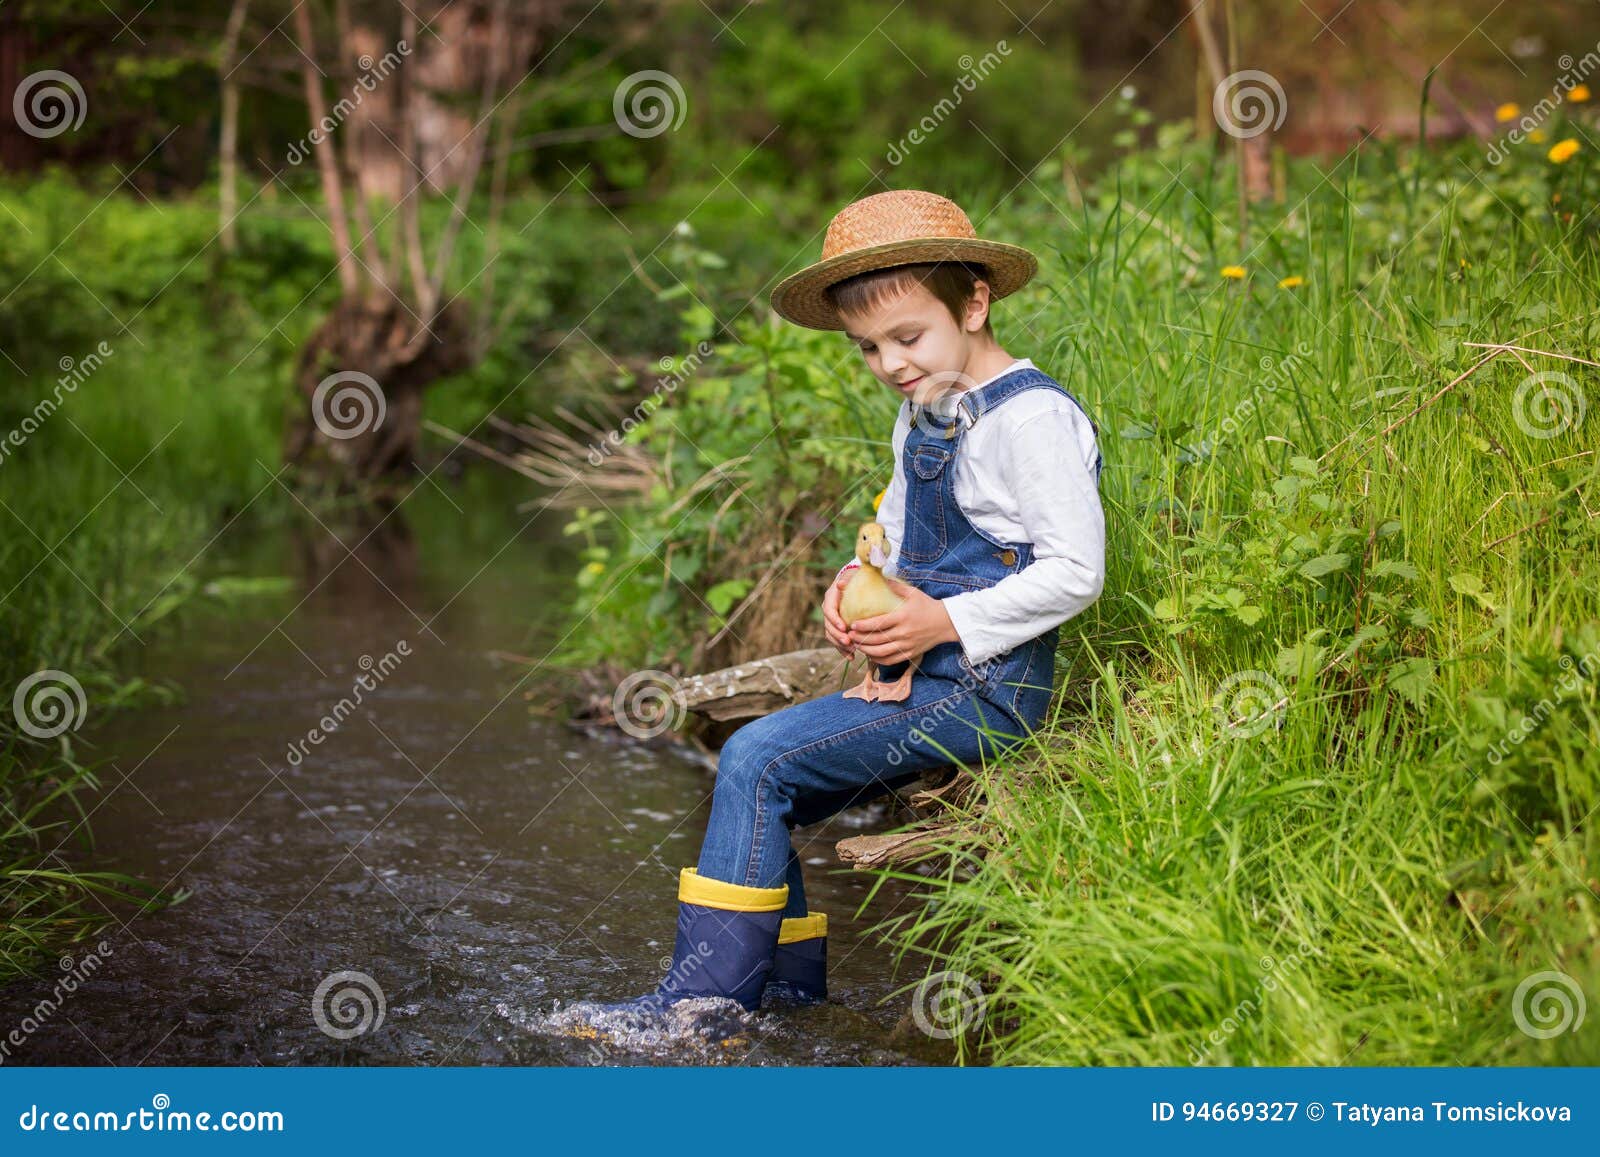 Sweet Child, Playing on Little River with Ducklings Stock Image - Image ...